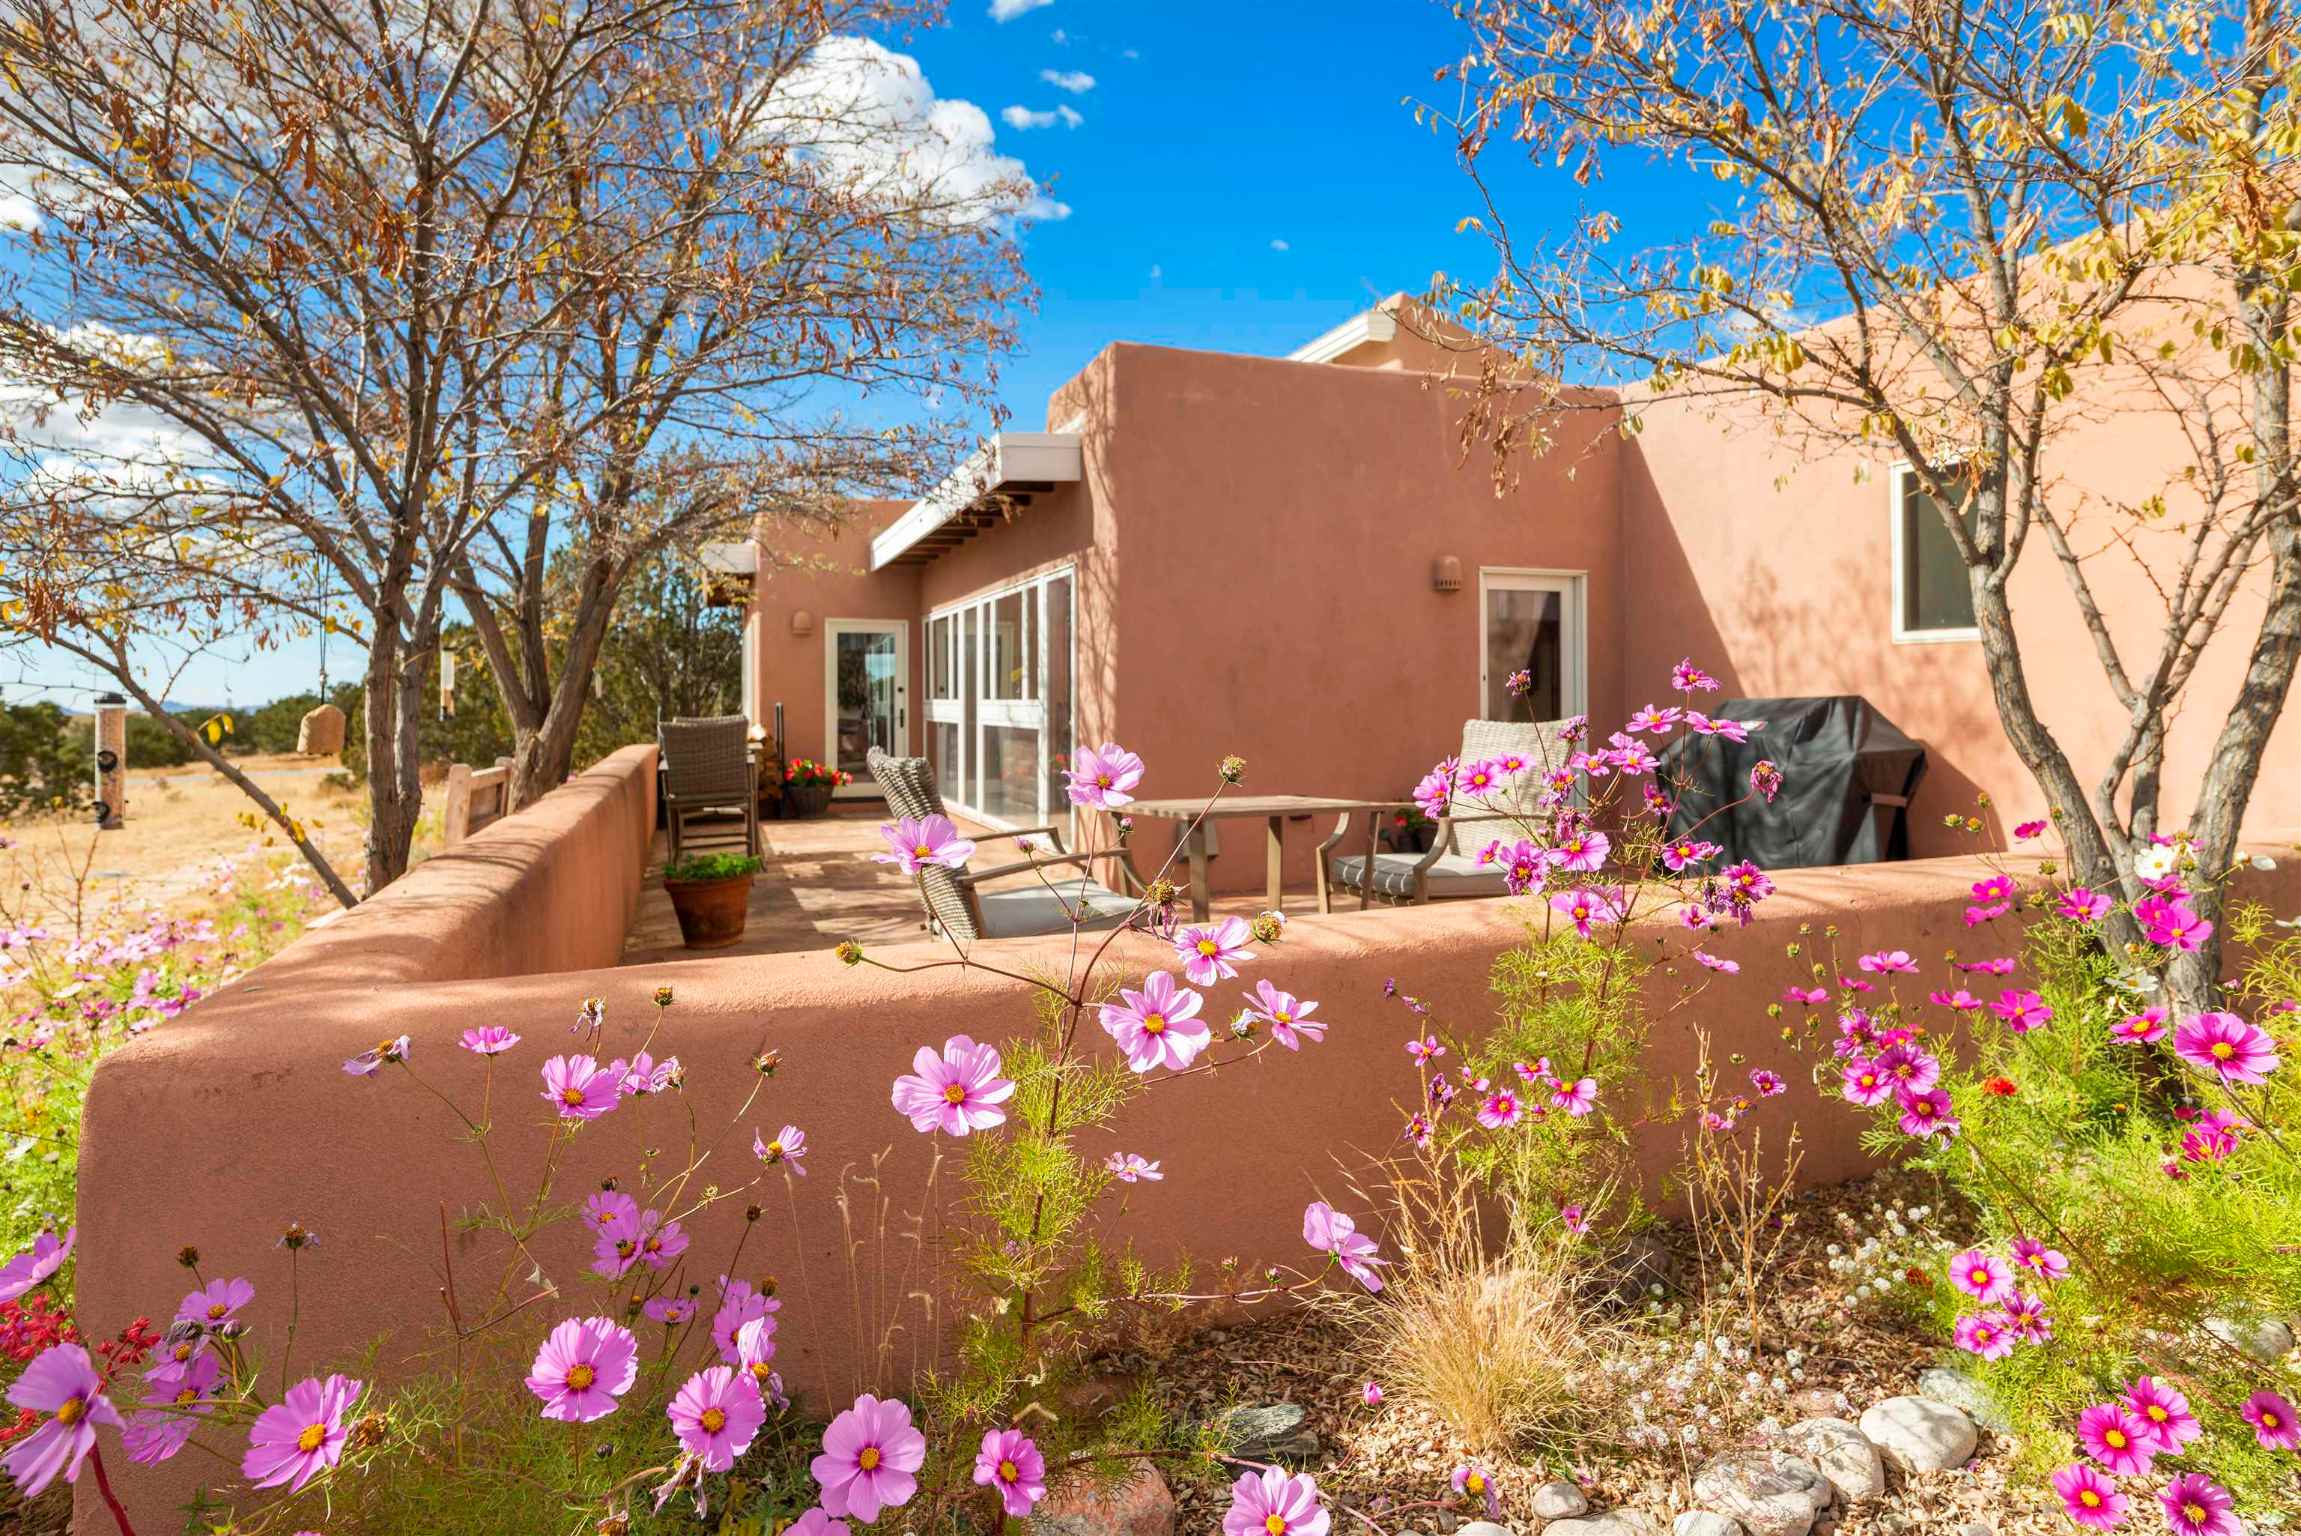 3 Aula, Santa Fe, New Mexico 87508, 2 Bedrooms Bedrooms, ,1 BathroomBathrooms,Residential,For Sale,3 Aula,202105526